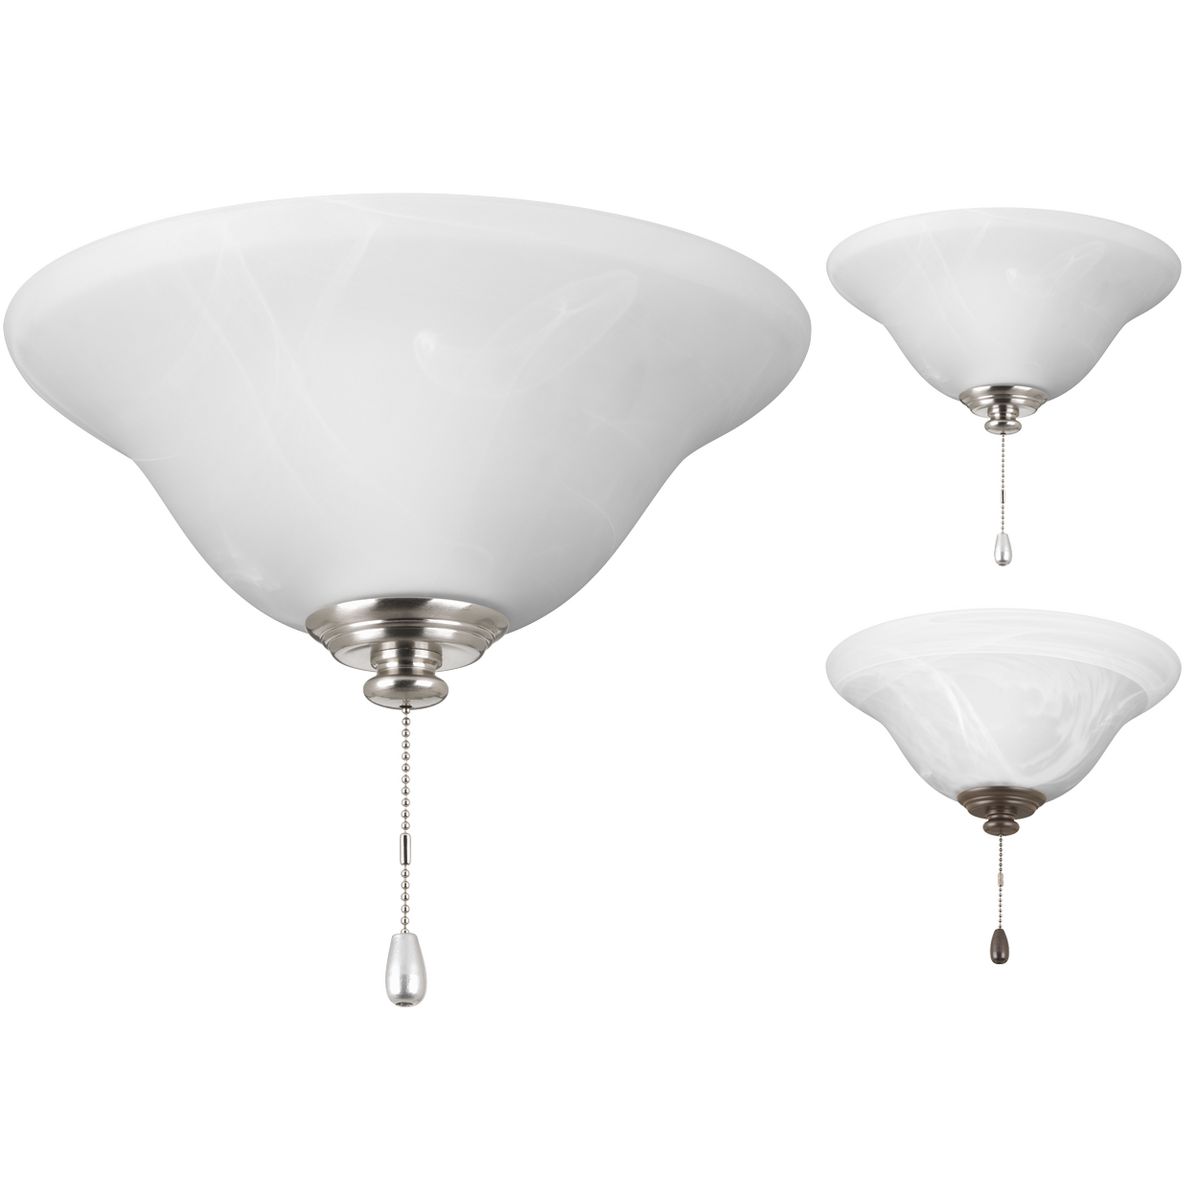 LED fan kit with alabaster style glass bowl. Finials included are -09 Brushed Nickel, -20 Antique Bronze, and -30 White with corresponding pull chain. 1241 source lumens, 1150 lumens delivered. Universal style lets you use with any indoor fan that accept an accessory light. Quick-connect wiring makes the installation process quick and easy.